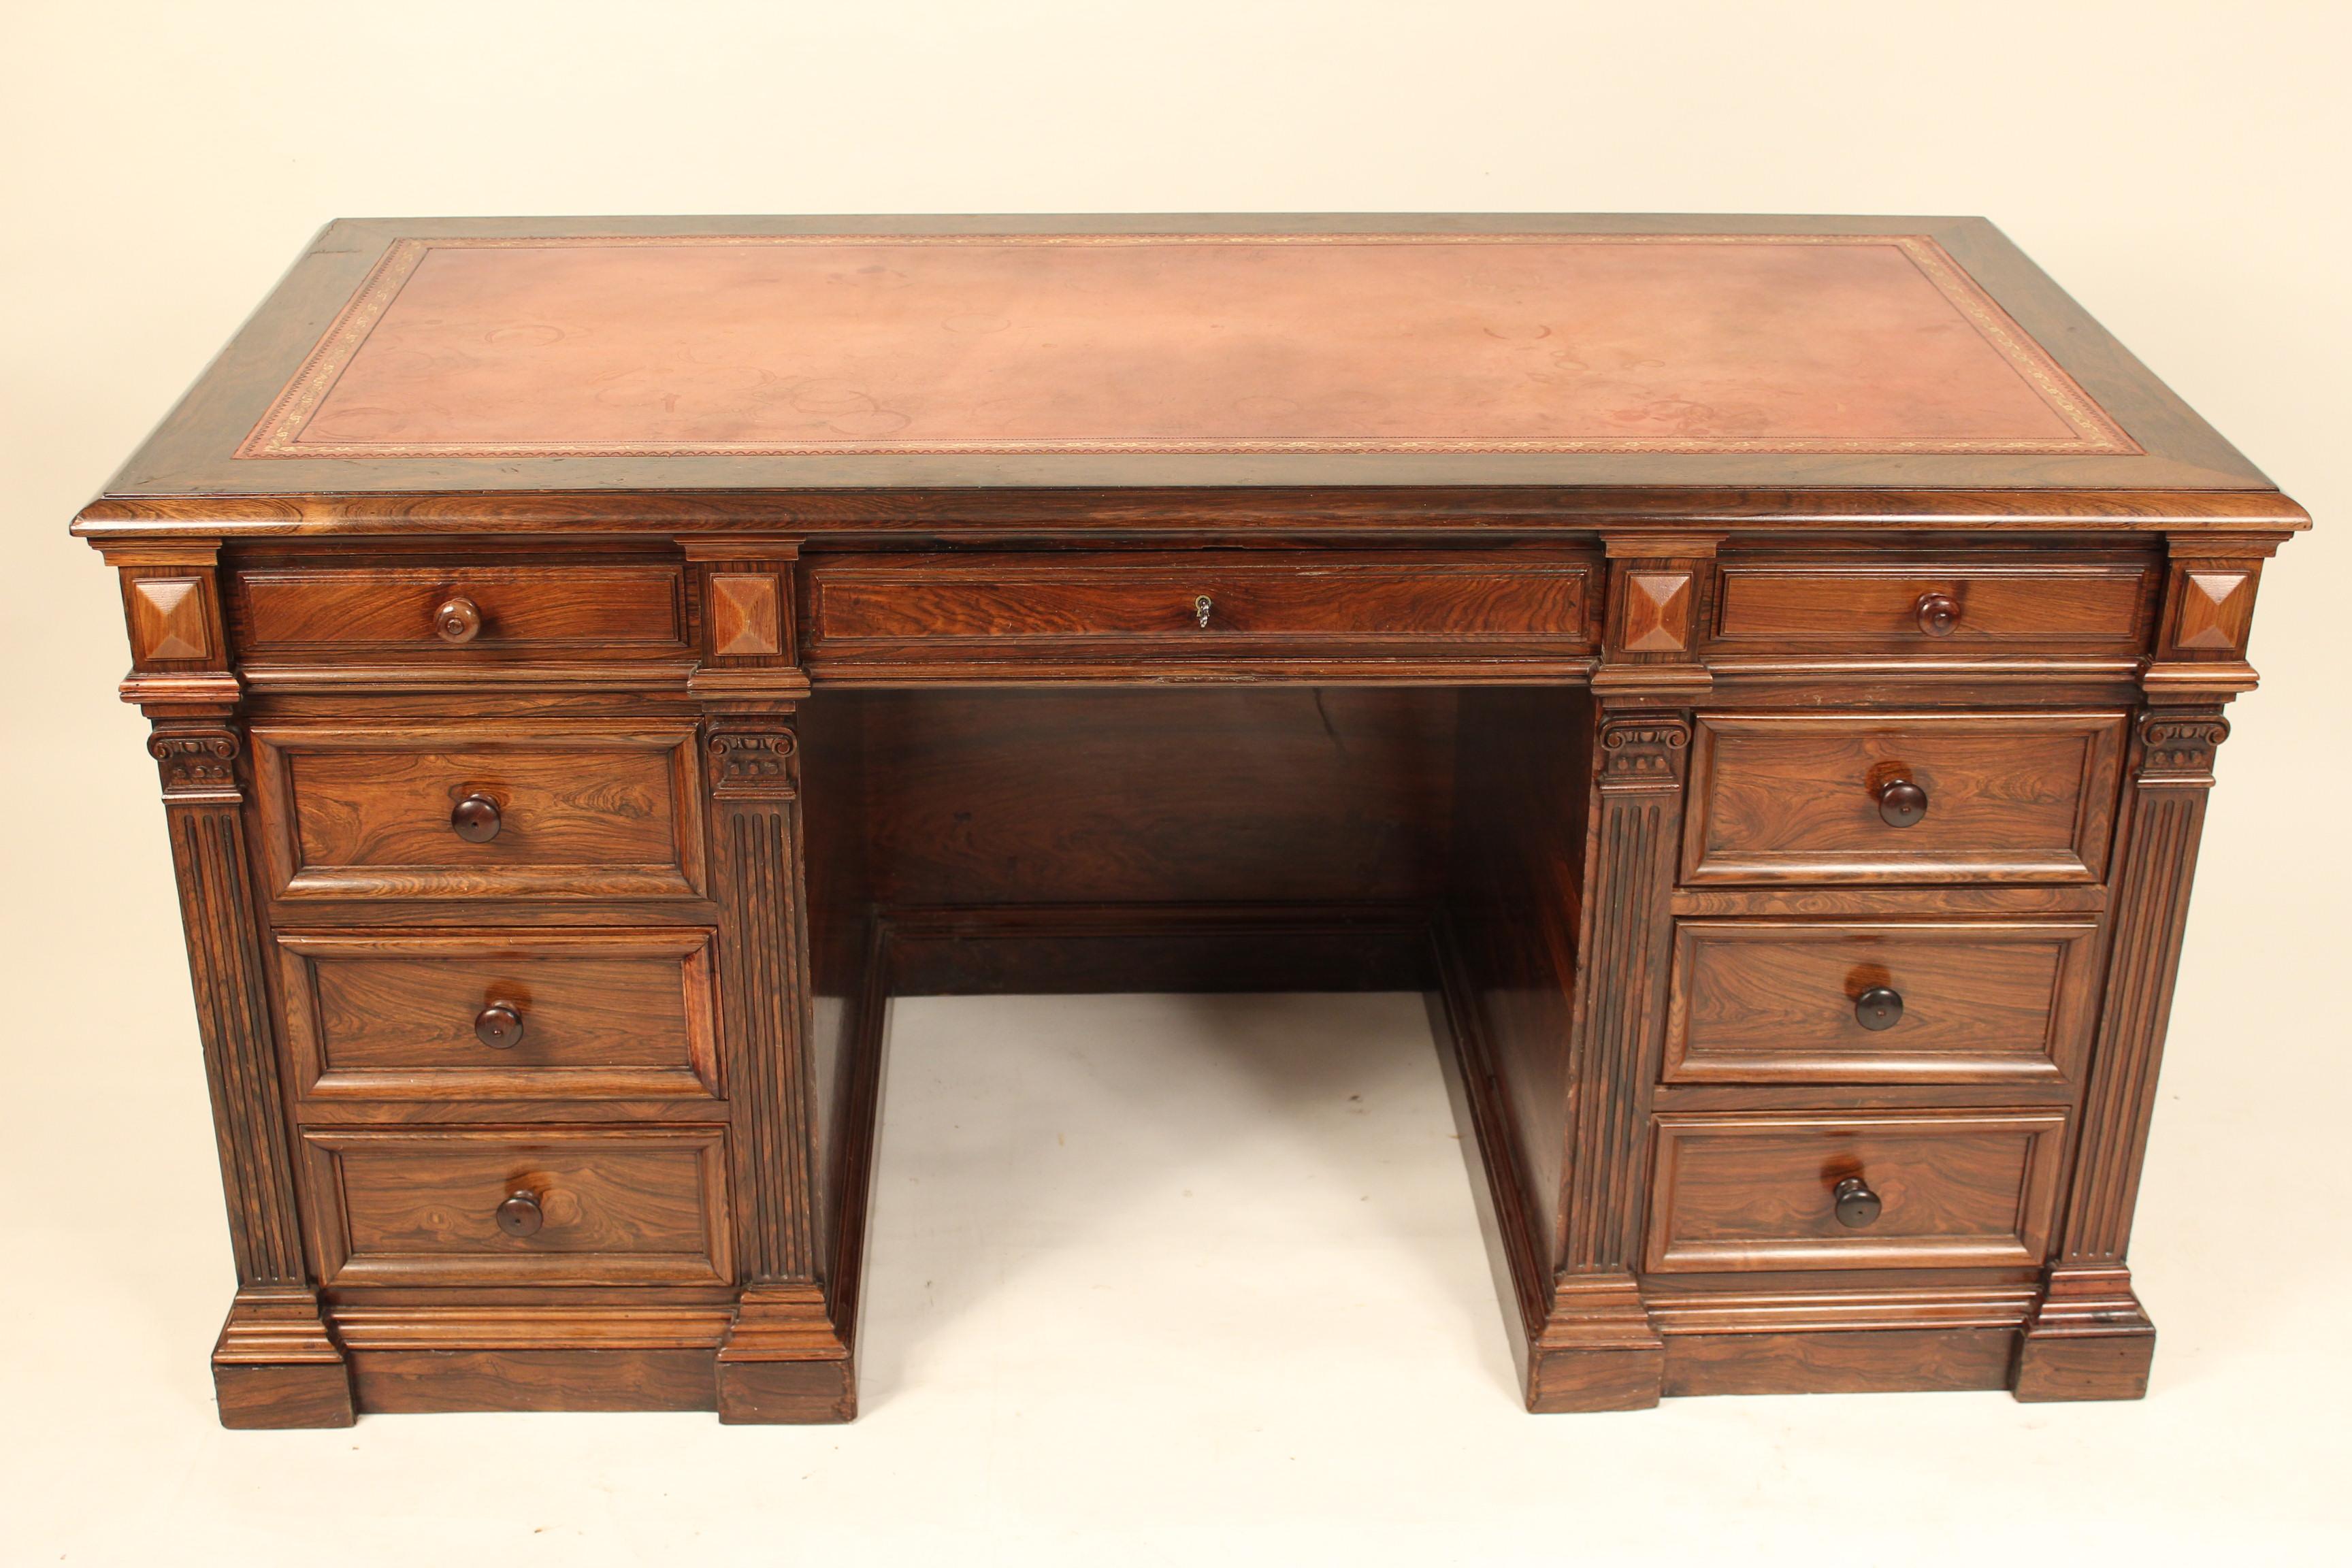 English Regency style rosewood desk with leather top, circa 1920. There are writing slides with leather tops that pull out / pull-out from each end. This desk has a locking mechanism, when the center drawer is closed or locked the side drawers are